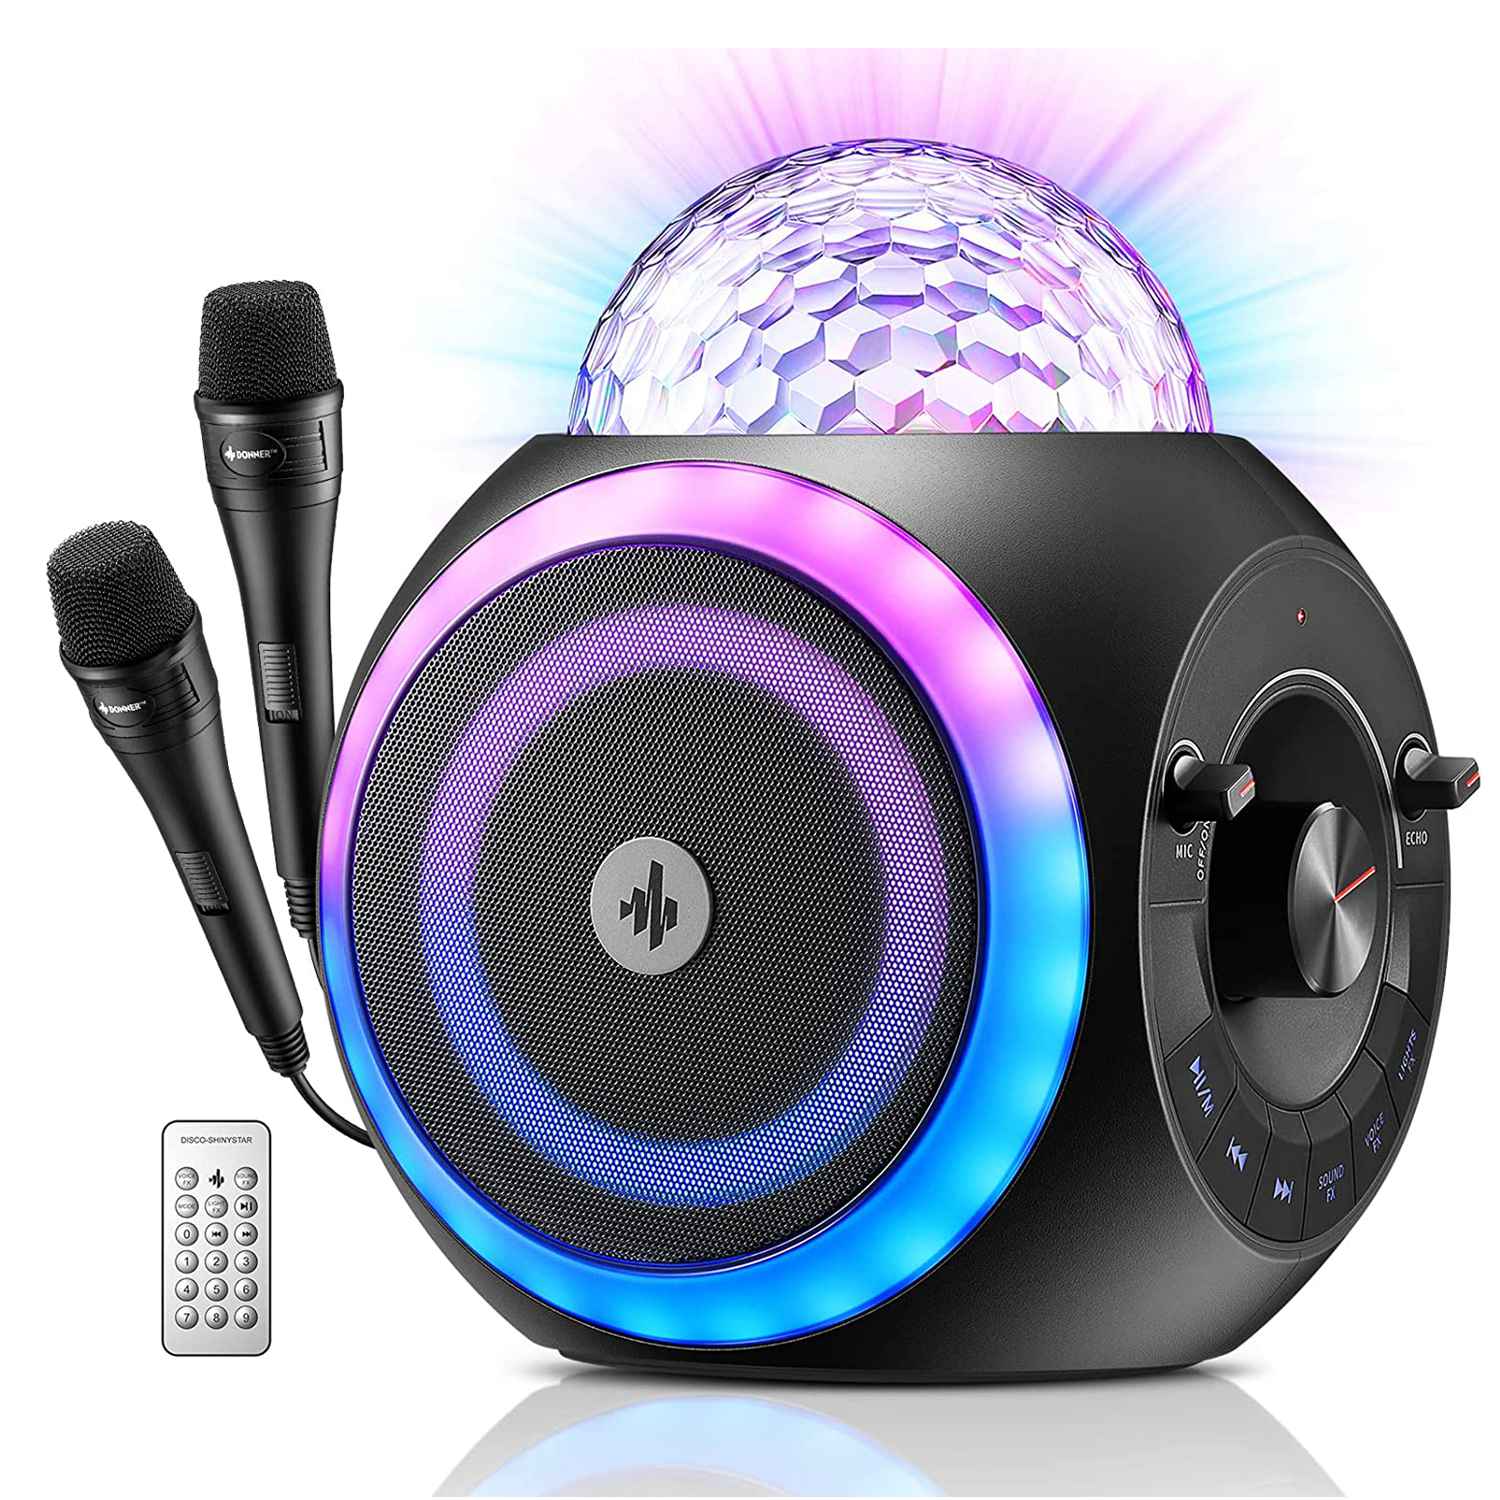 

Donner Portable Remote Control Karaoke Machine with Disco Ball 2 Microphone Bluetooth PA Speaker and Lights